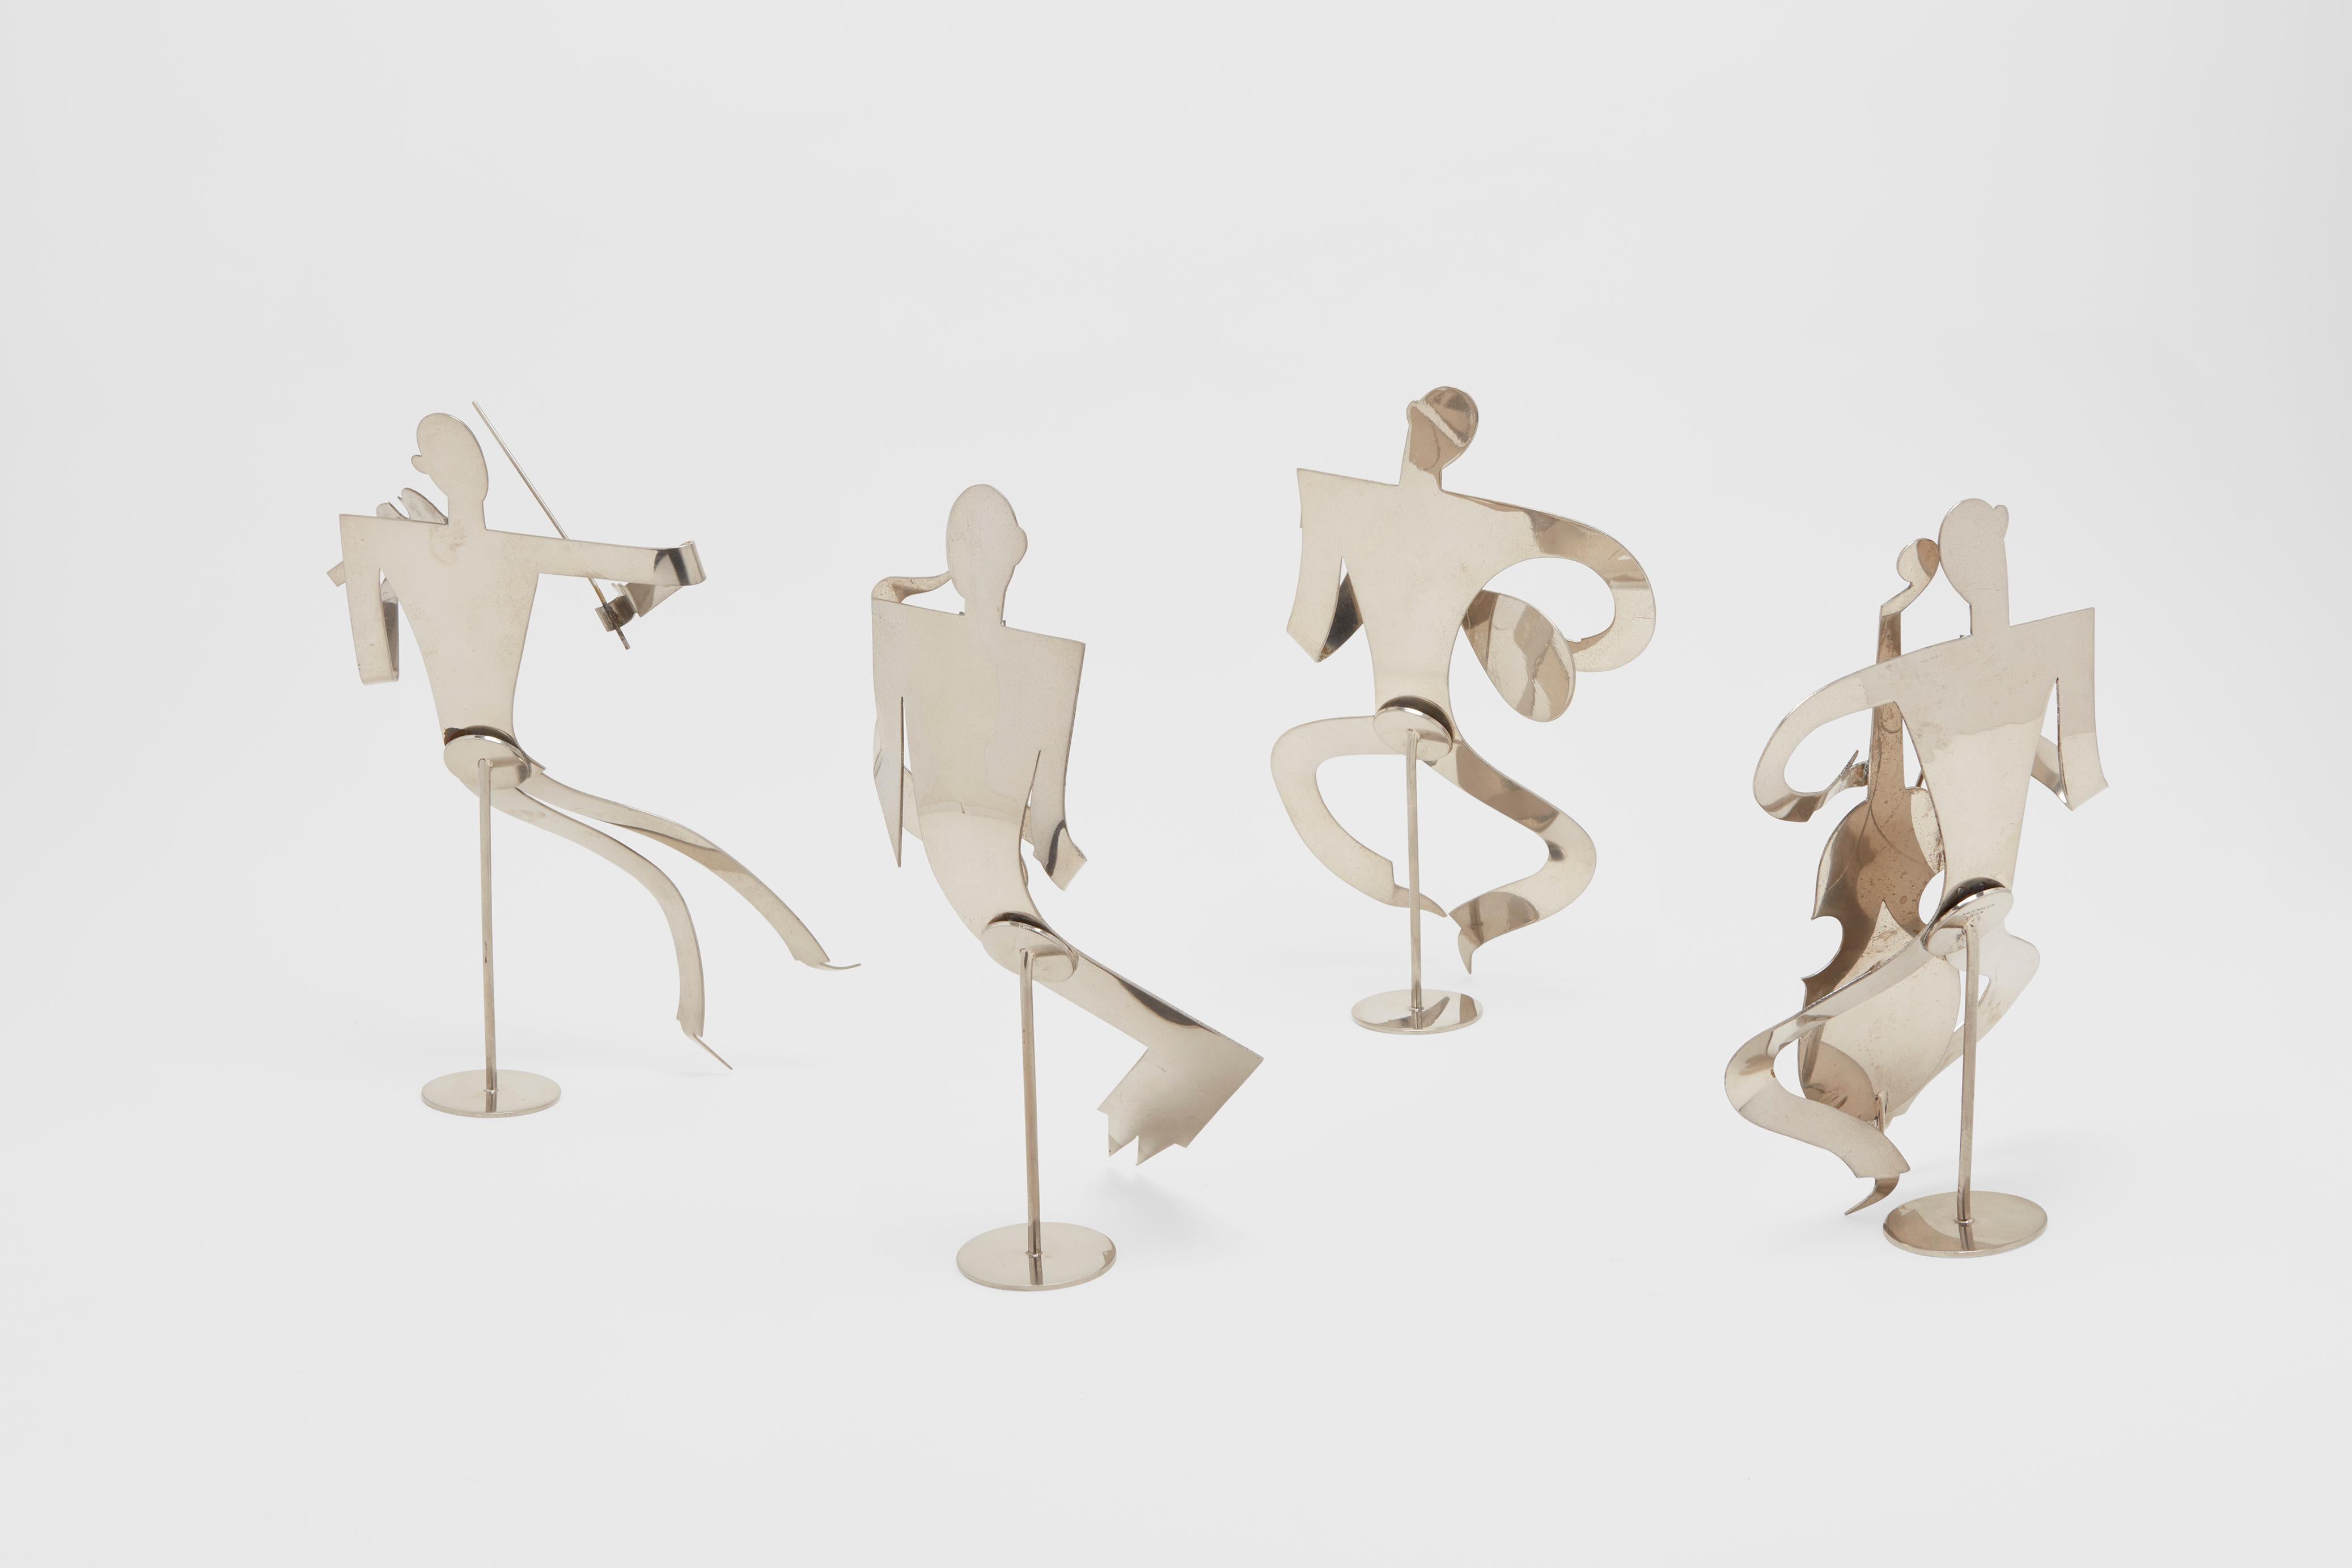 A four piece, complete, set of jazz musician sculptures in nickel plated bronze. This stunning and very rare jazz ensemble was created by the uniquely creative Franz Hagenauer. Franz was a second generation Hagenauer working out of the Werkstätte